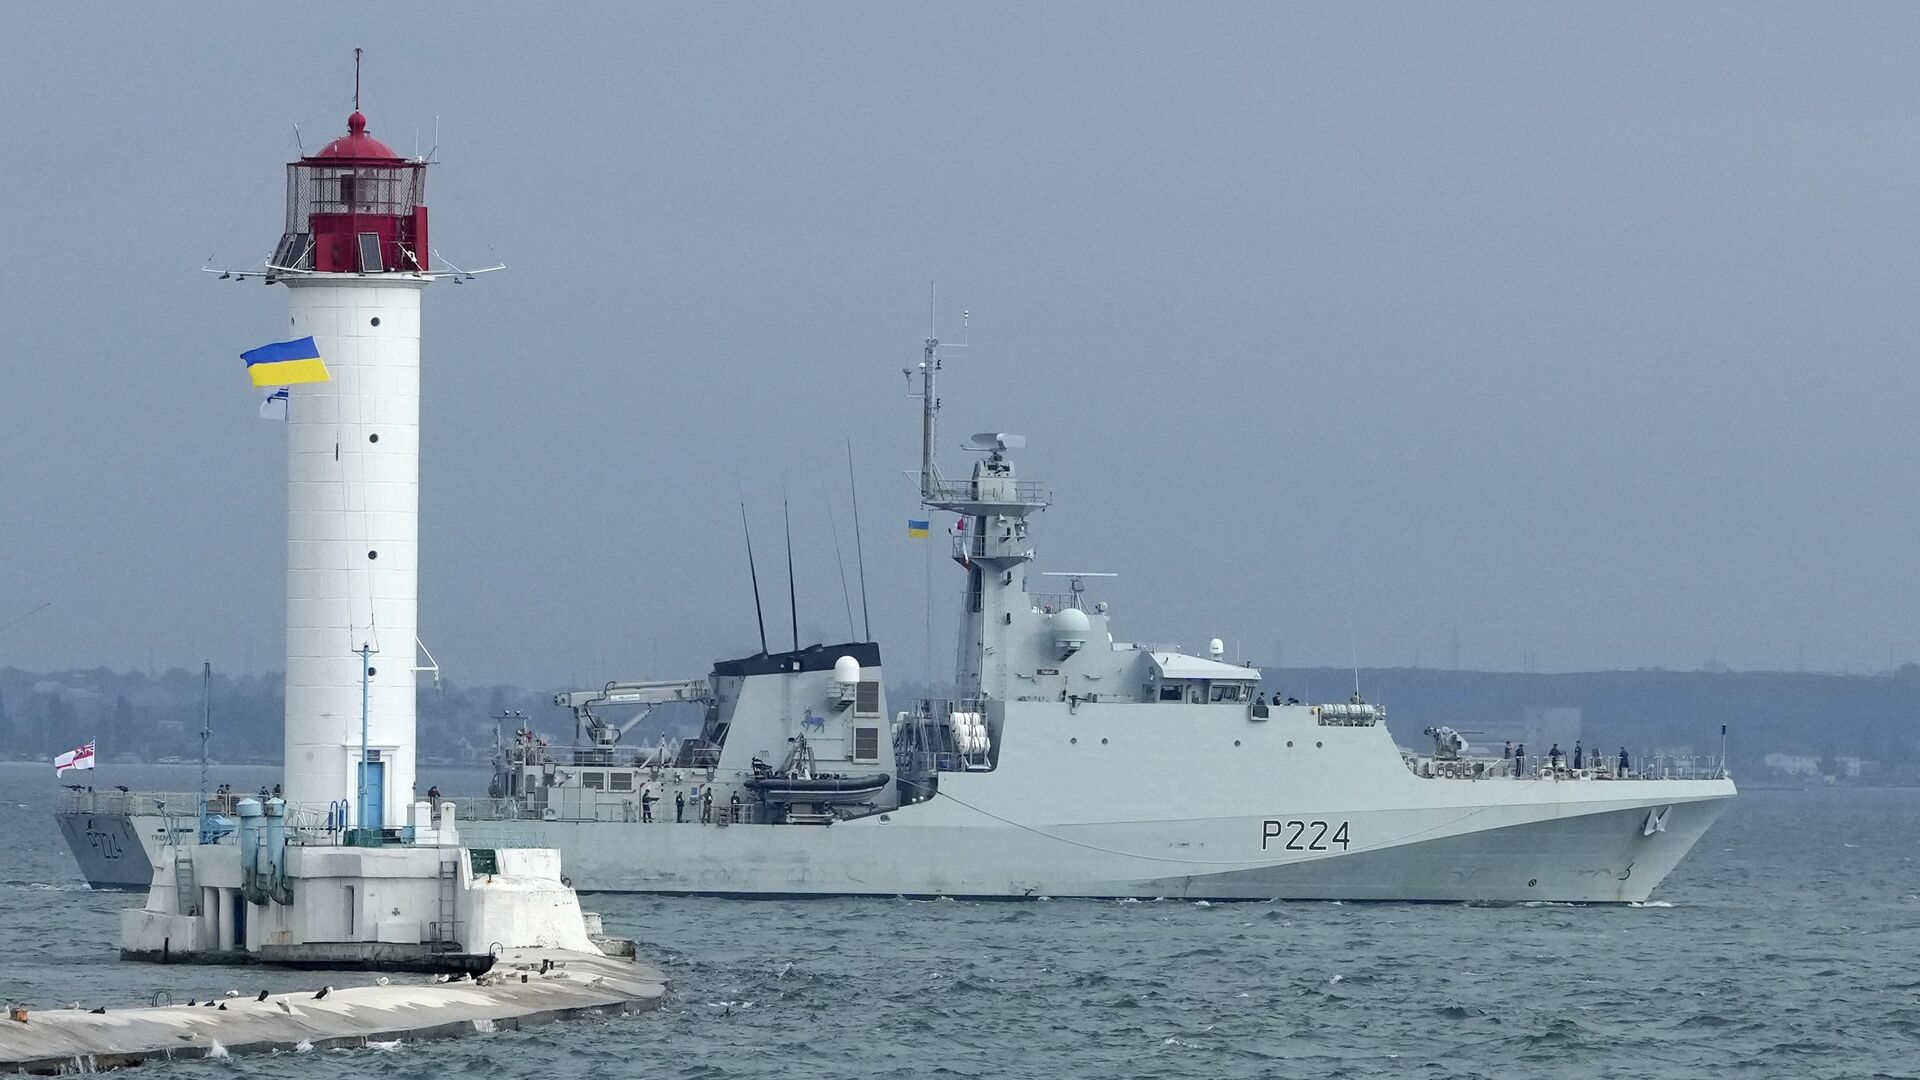 A view of the Britain's Royal Navy patrol ship OPV Trent in the Black Sea, Wednesday, July 7, 2021 during Sea Breeze 2021 maneuvers - Sputnik International, 1920, 09.12.2021